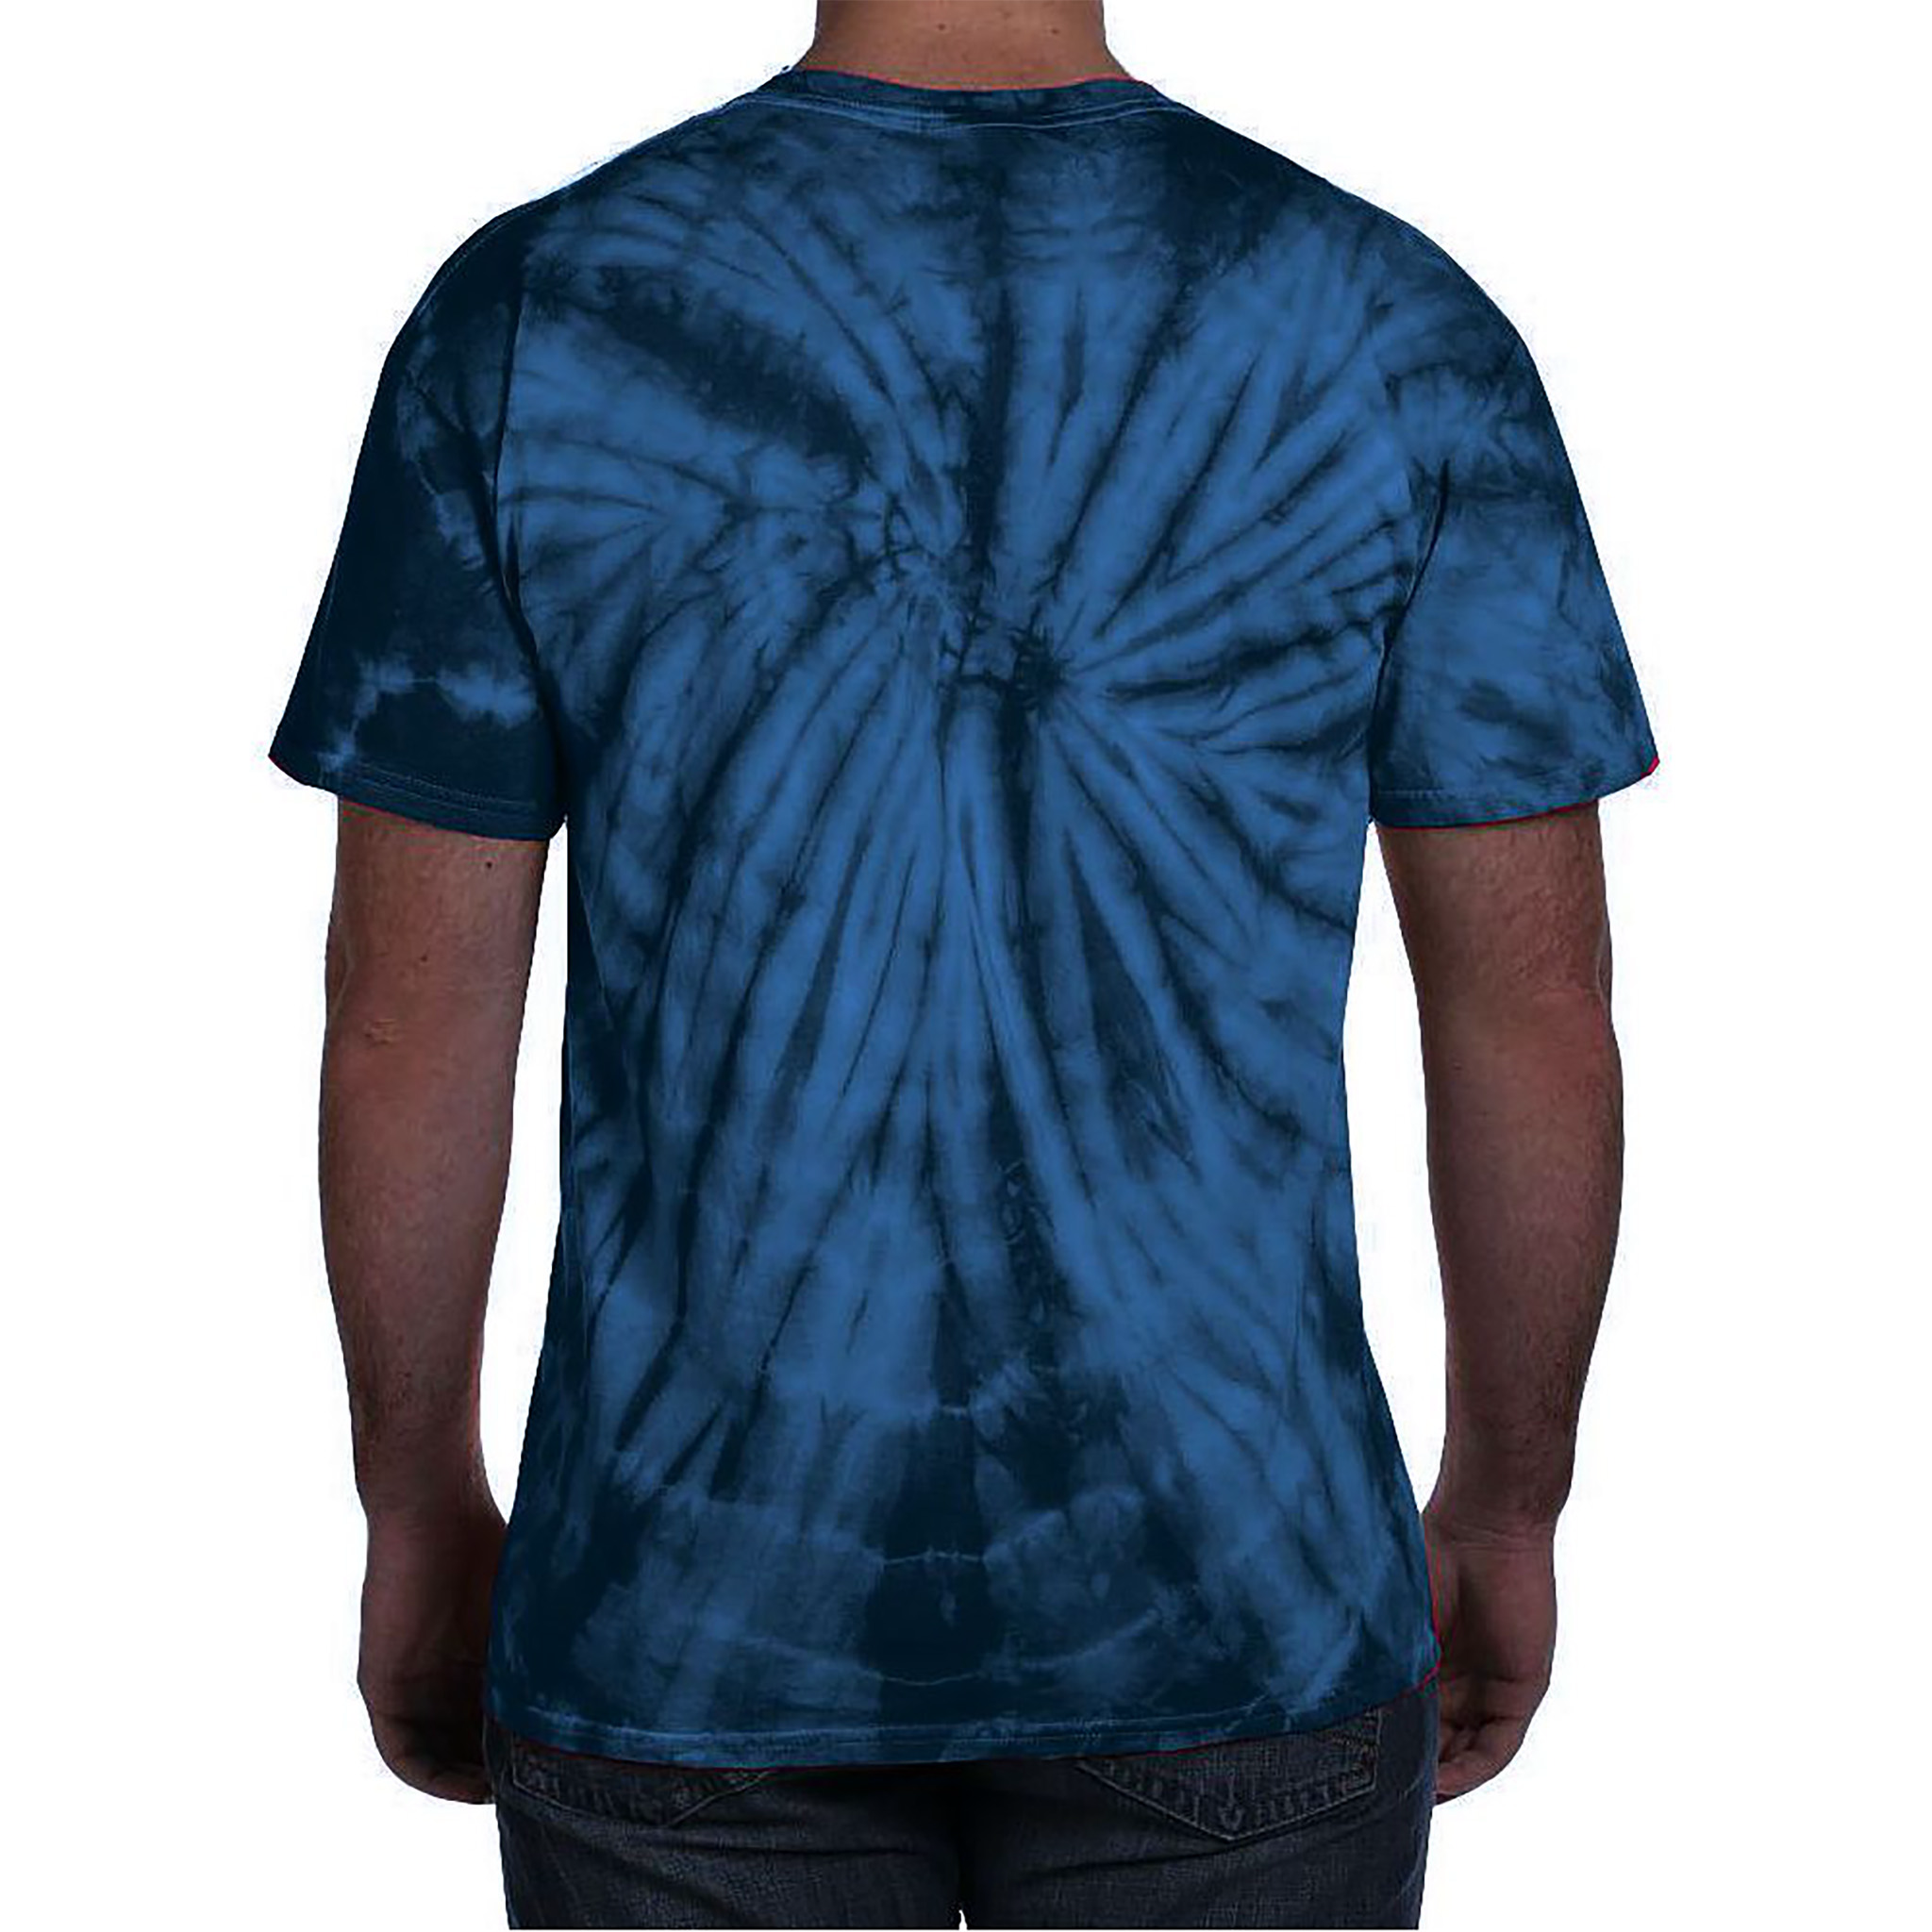 Middle Finger 40th Birthday Funny Tie-Dye T-Shirt